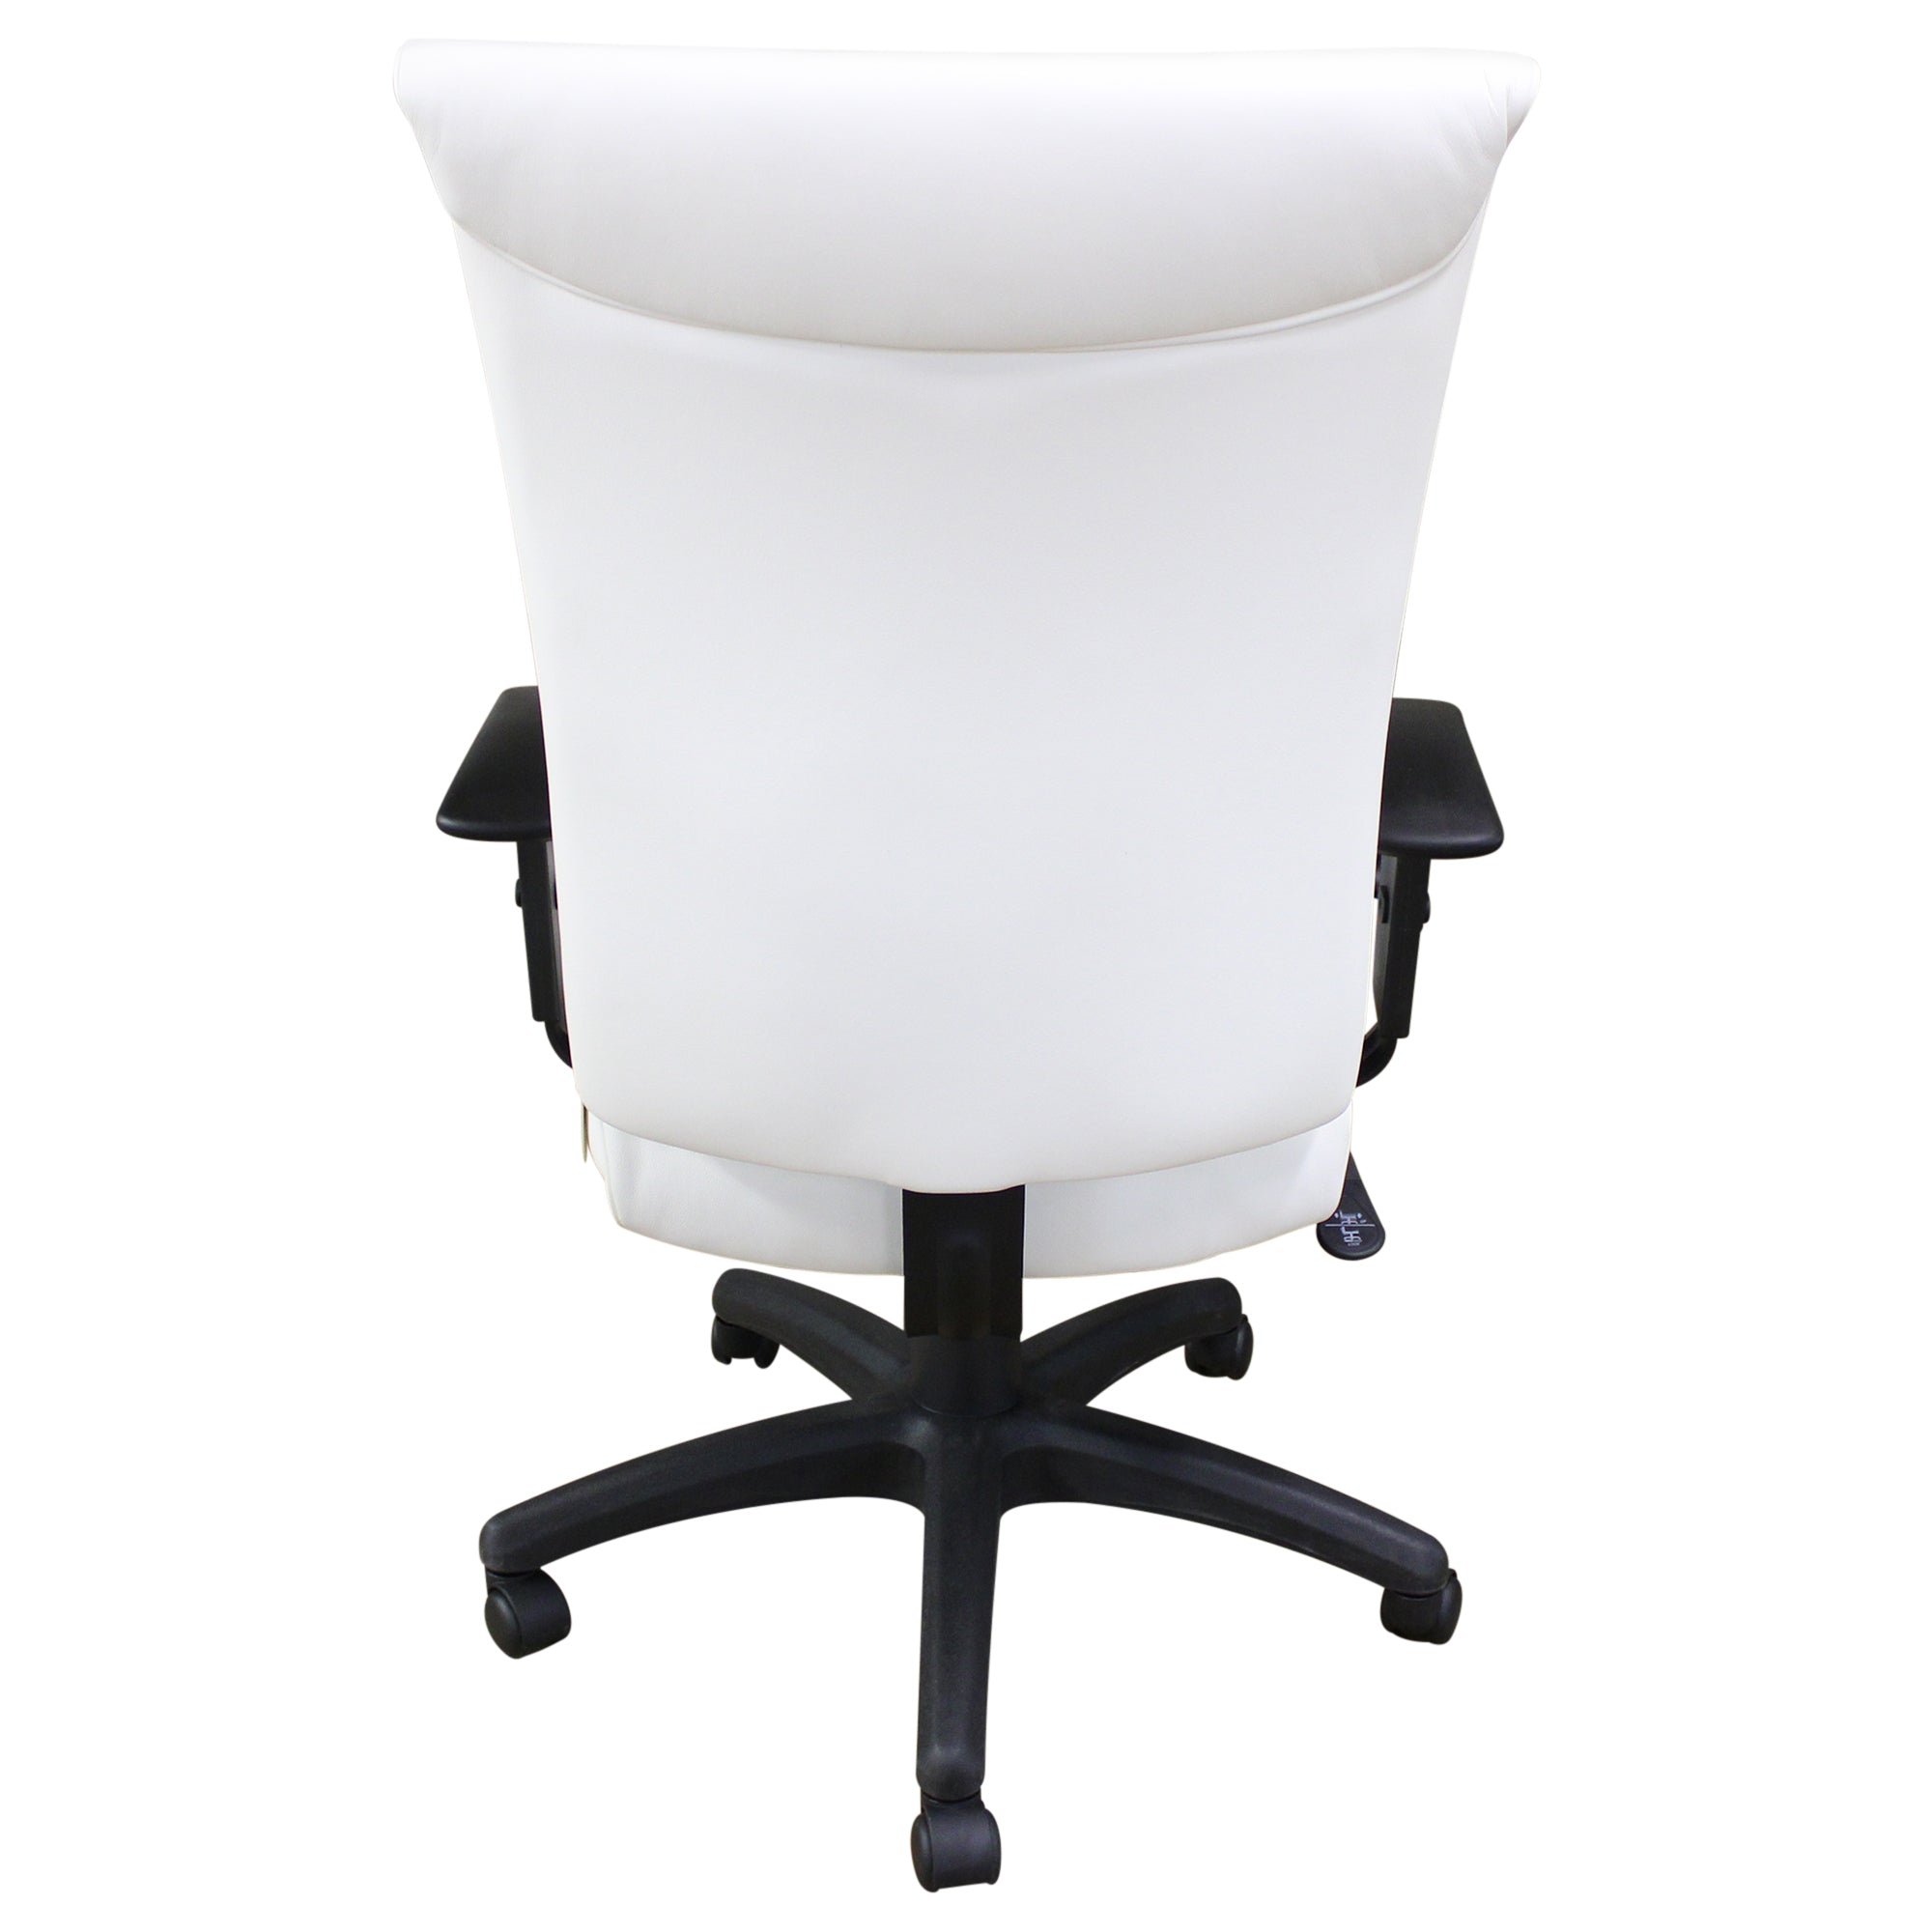 Compel Zen Task Chair, White - New CLOSEOUT